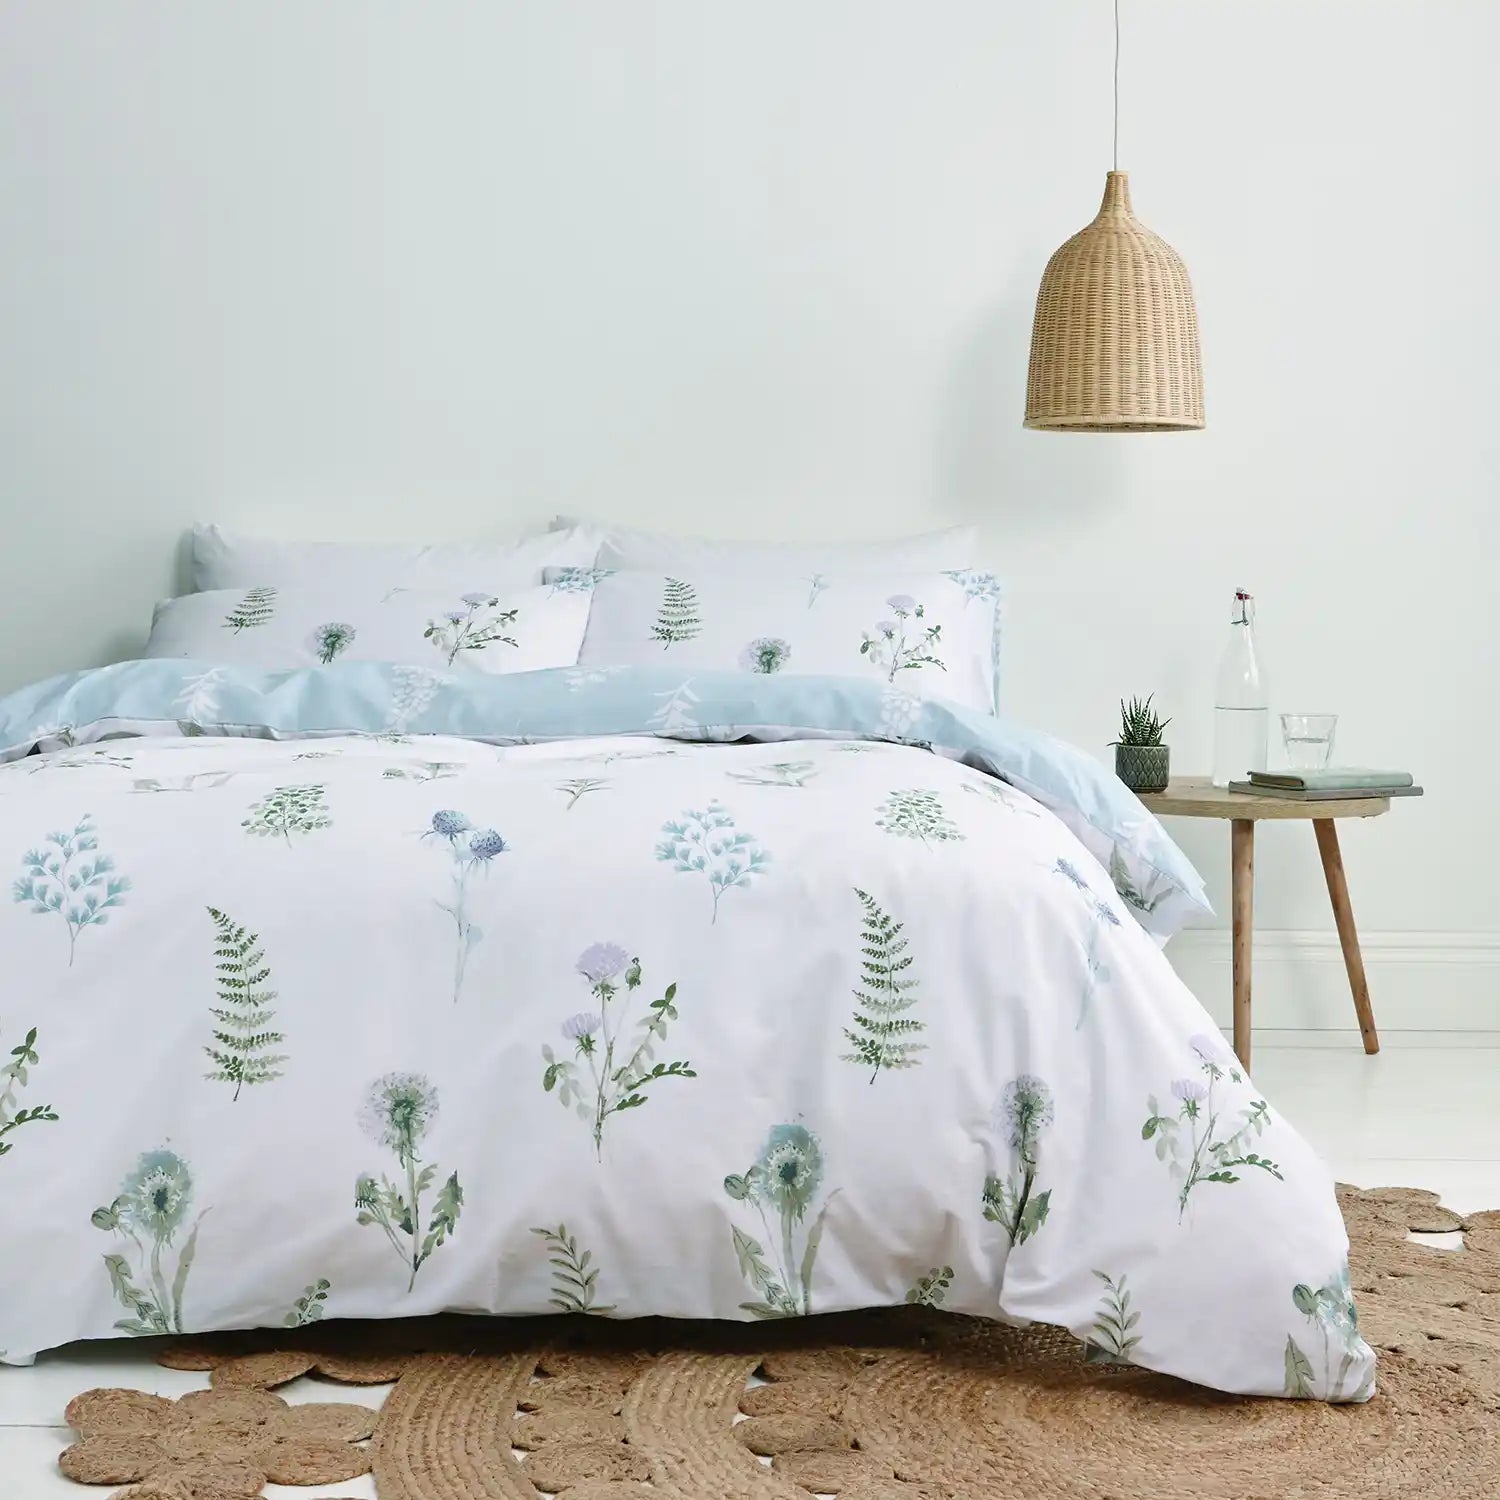  Bianca Meadow Flowers Egyptian Cotton Double Duvet Cover Set with Pillowcases White 1 Shaws Department Stores